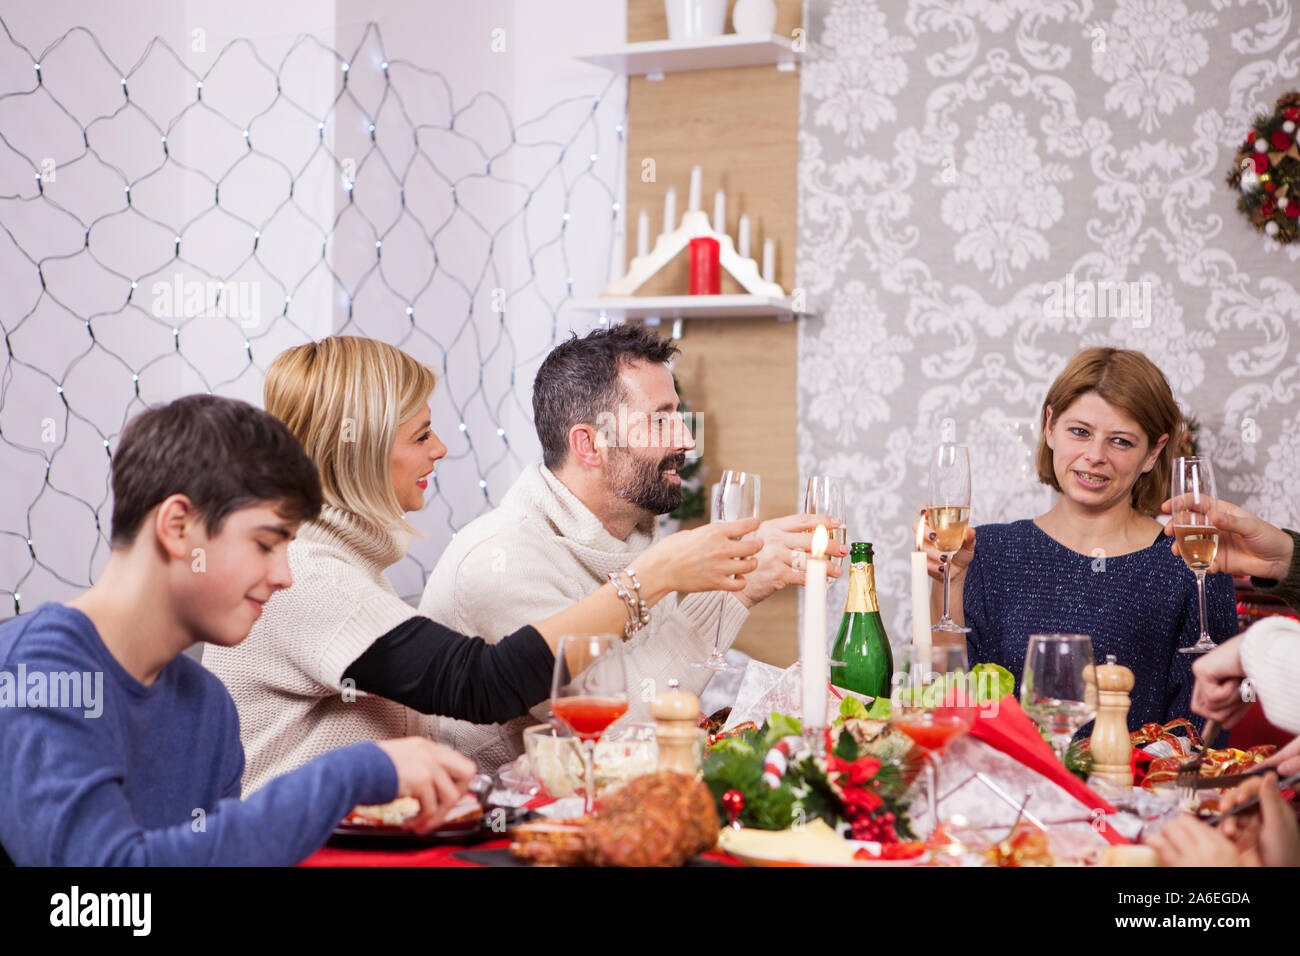 Family celebrating christmas in a cozy apartment. Christmas decoration. Children sitting around the table. Stock Photo